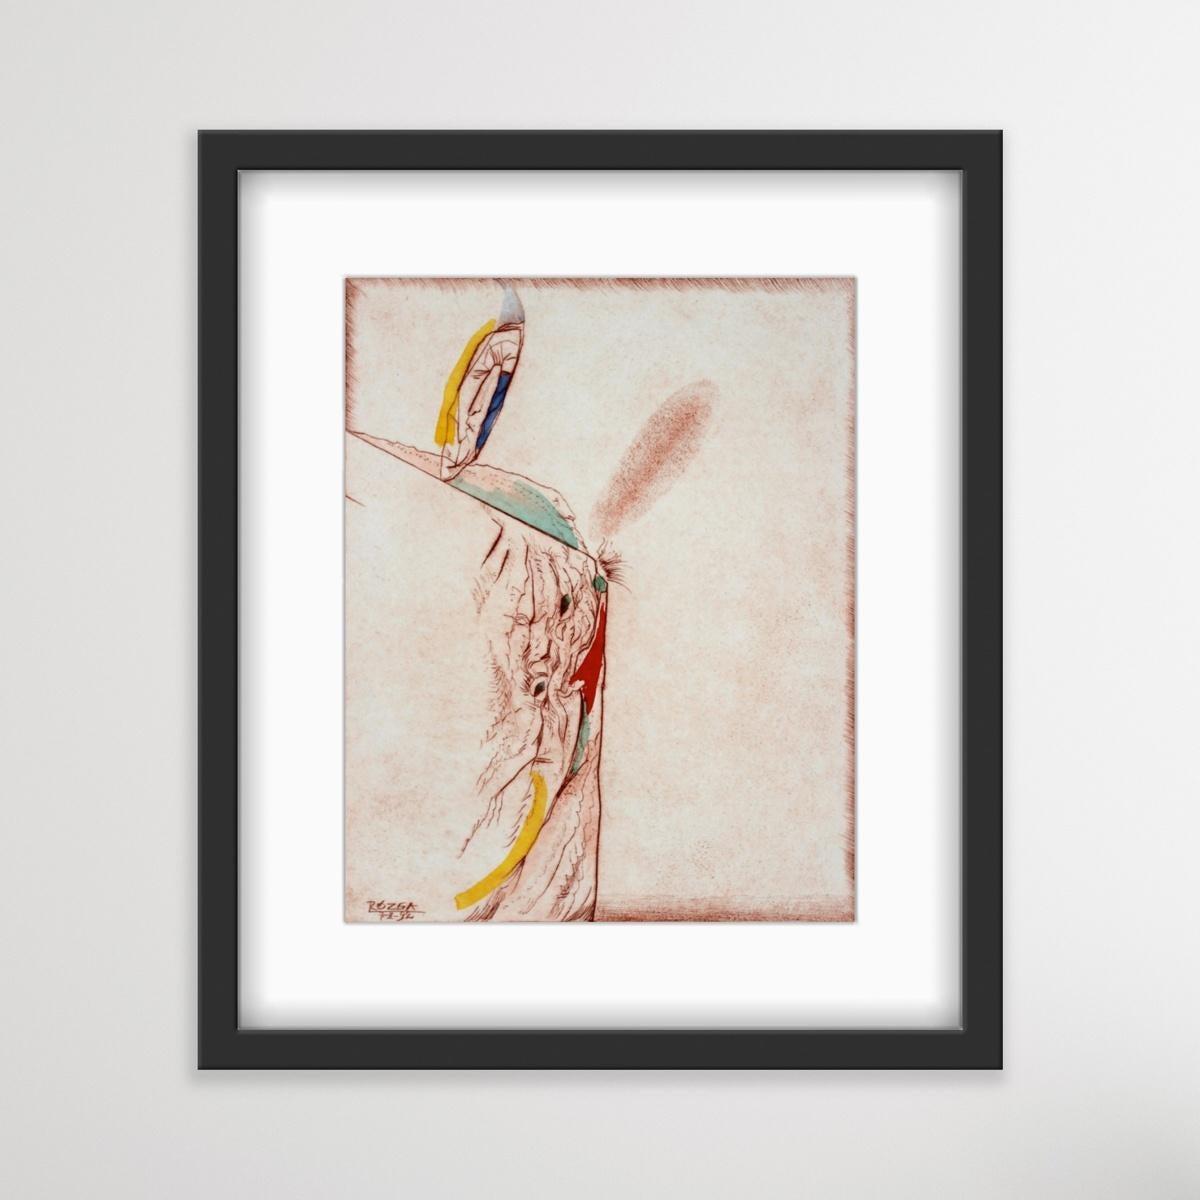 Egea, an edge - XX Century, Abstract Etching Print, Colorful - Beige Abstract Print by Leszek Rózga